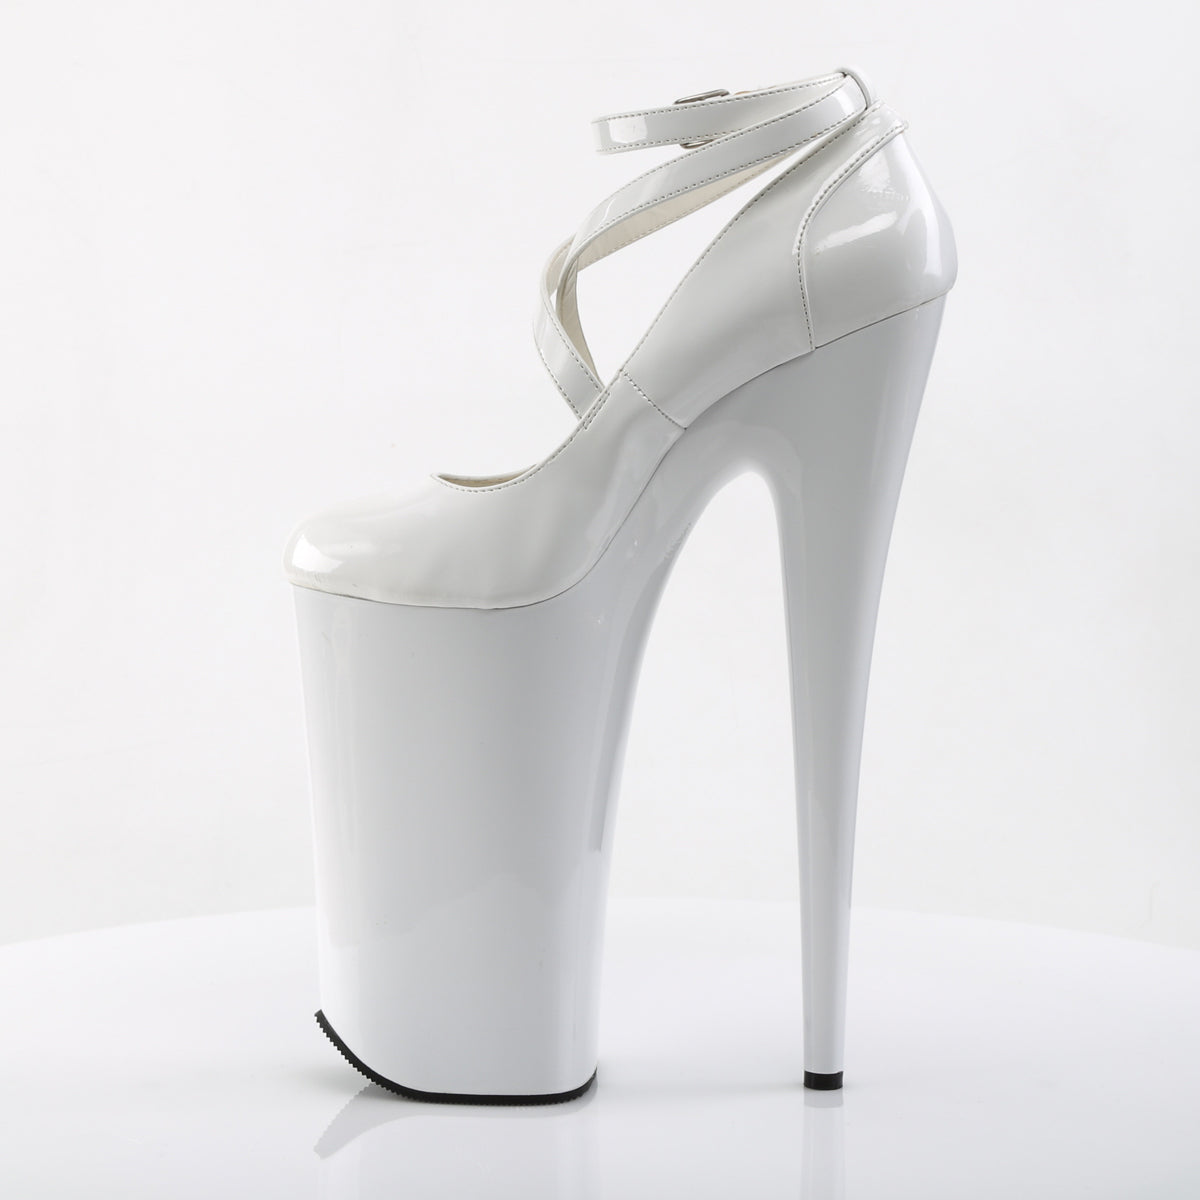 BEYOND-087 Sexy 10" Heel White Pole Dancing Platforms-Pleaser- Sexy Shoes Pole Dance Heels